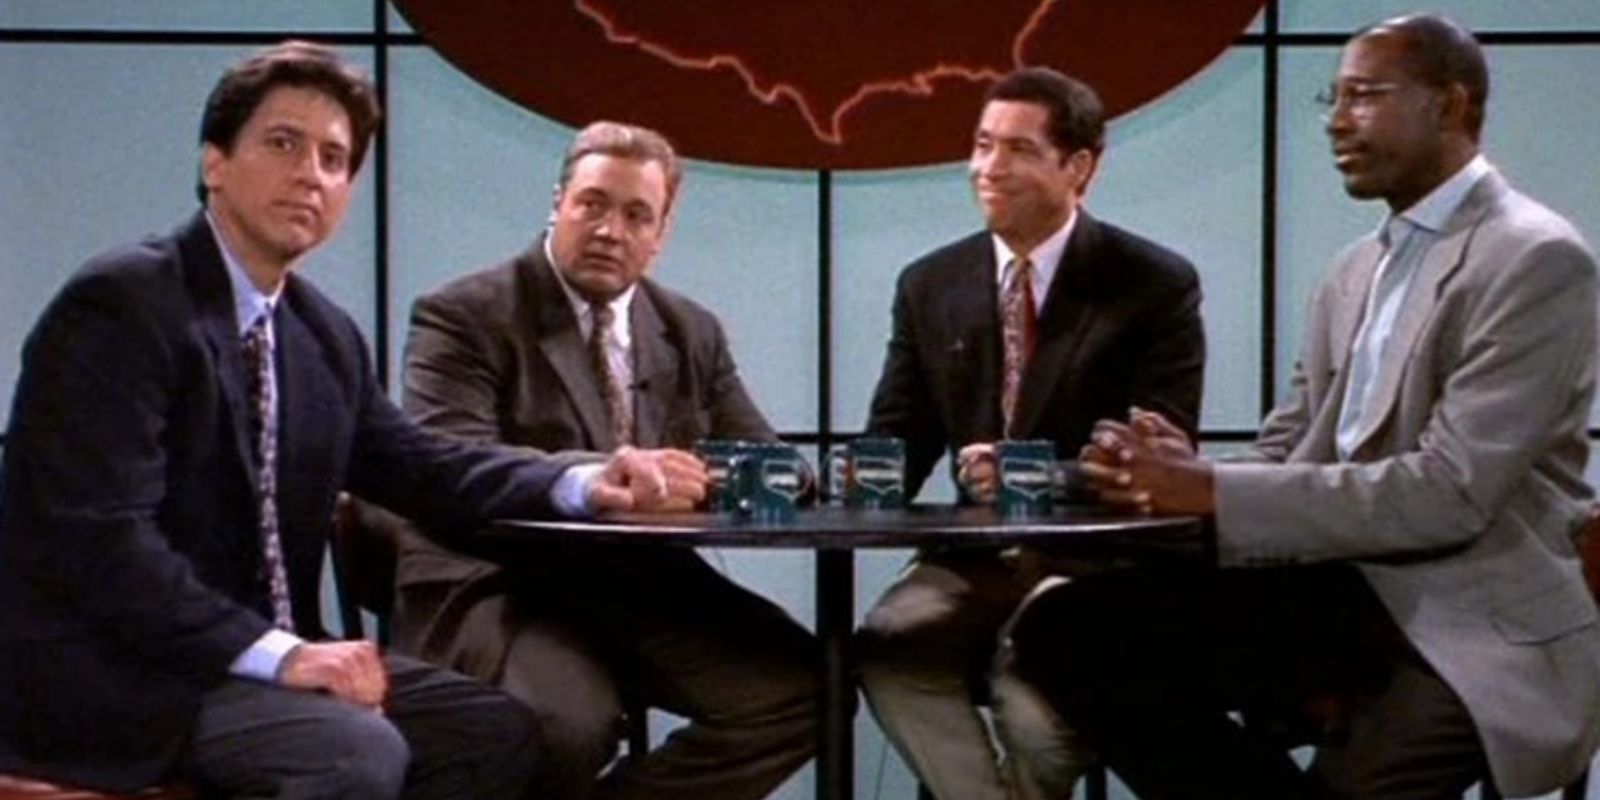 James Worthy sits on the sports talk show panel with Ray Barone in Everybody Loves Raymond